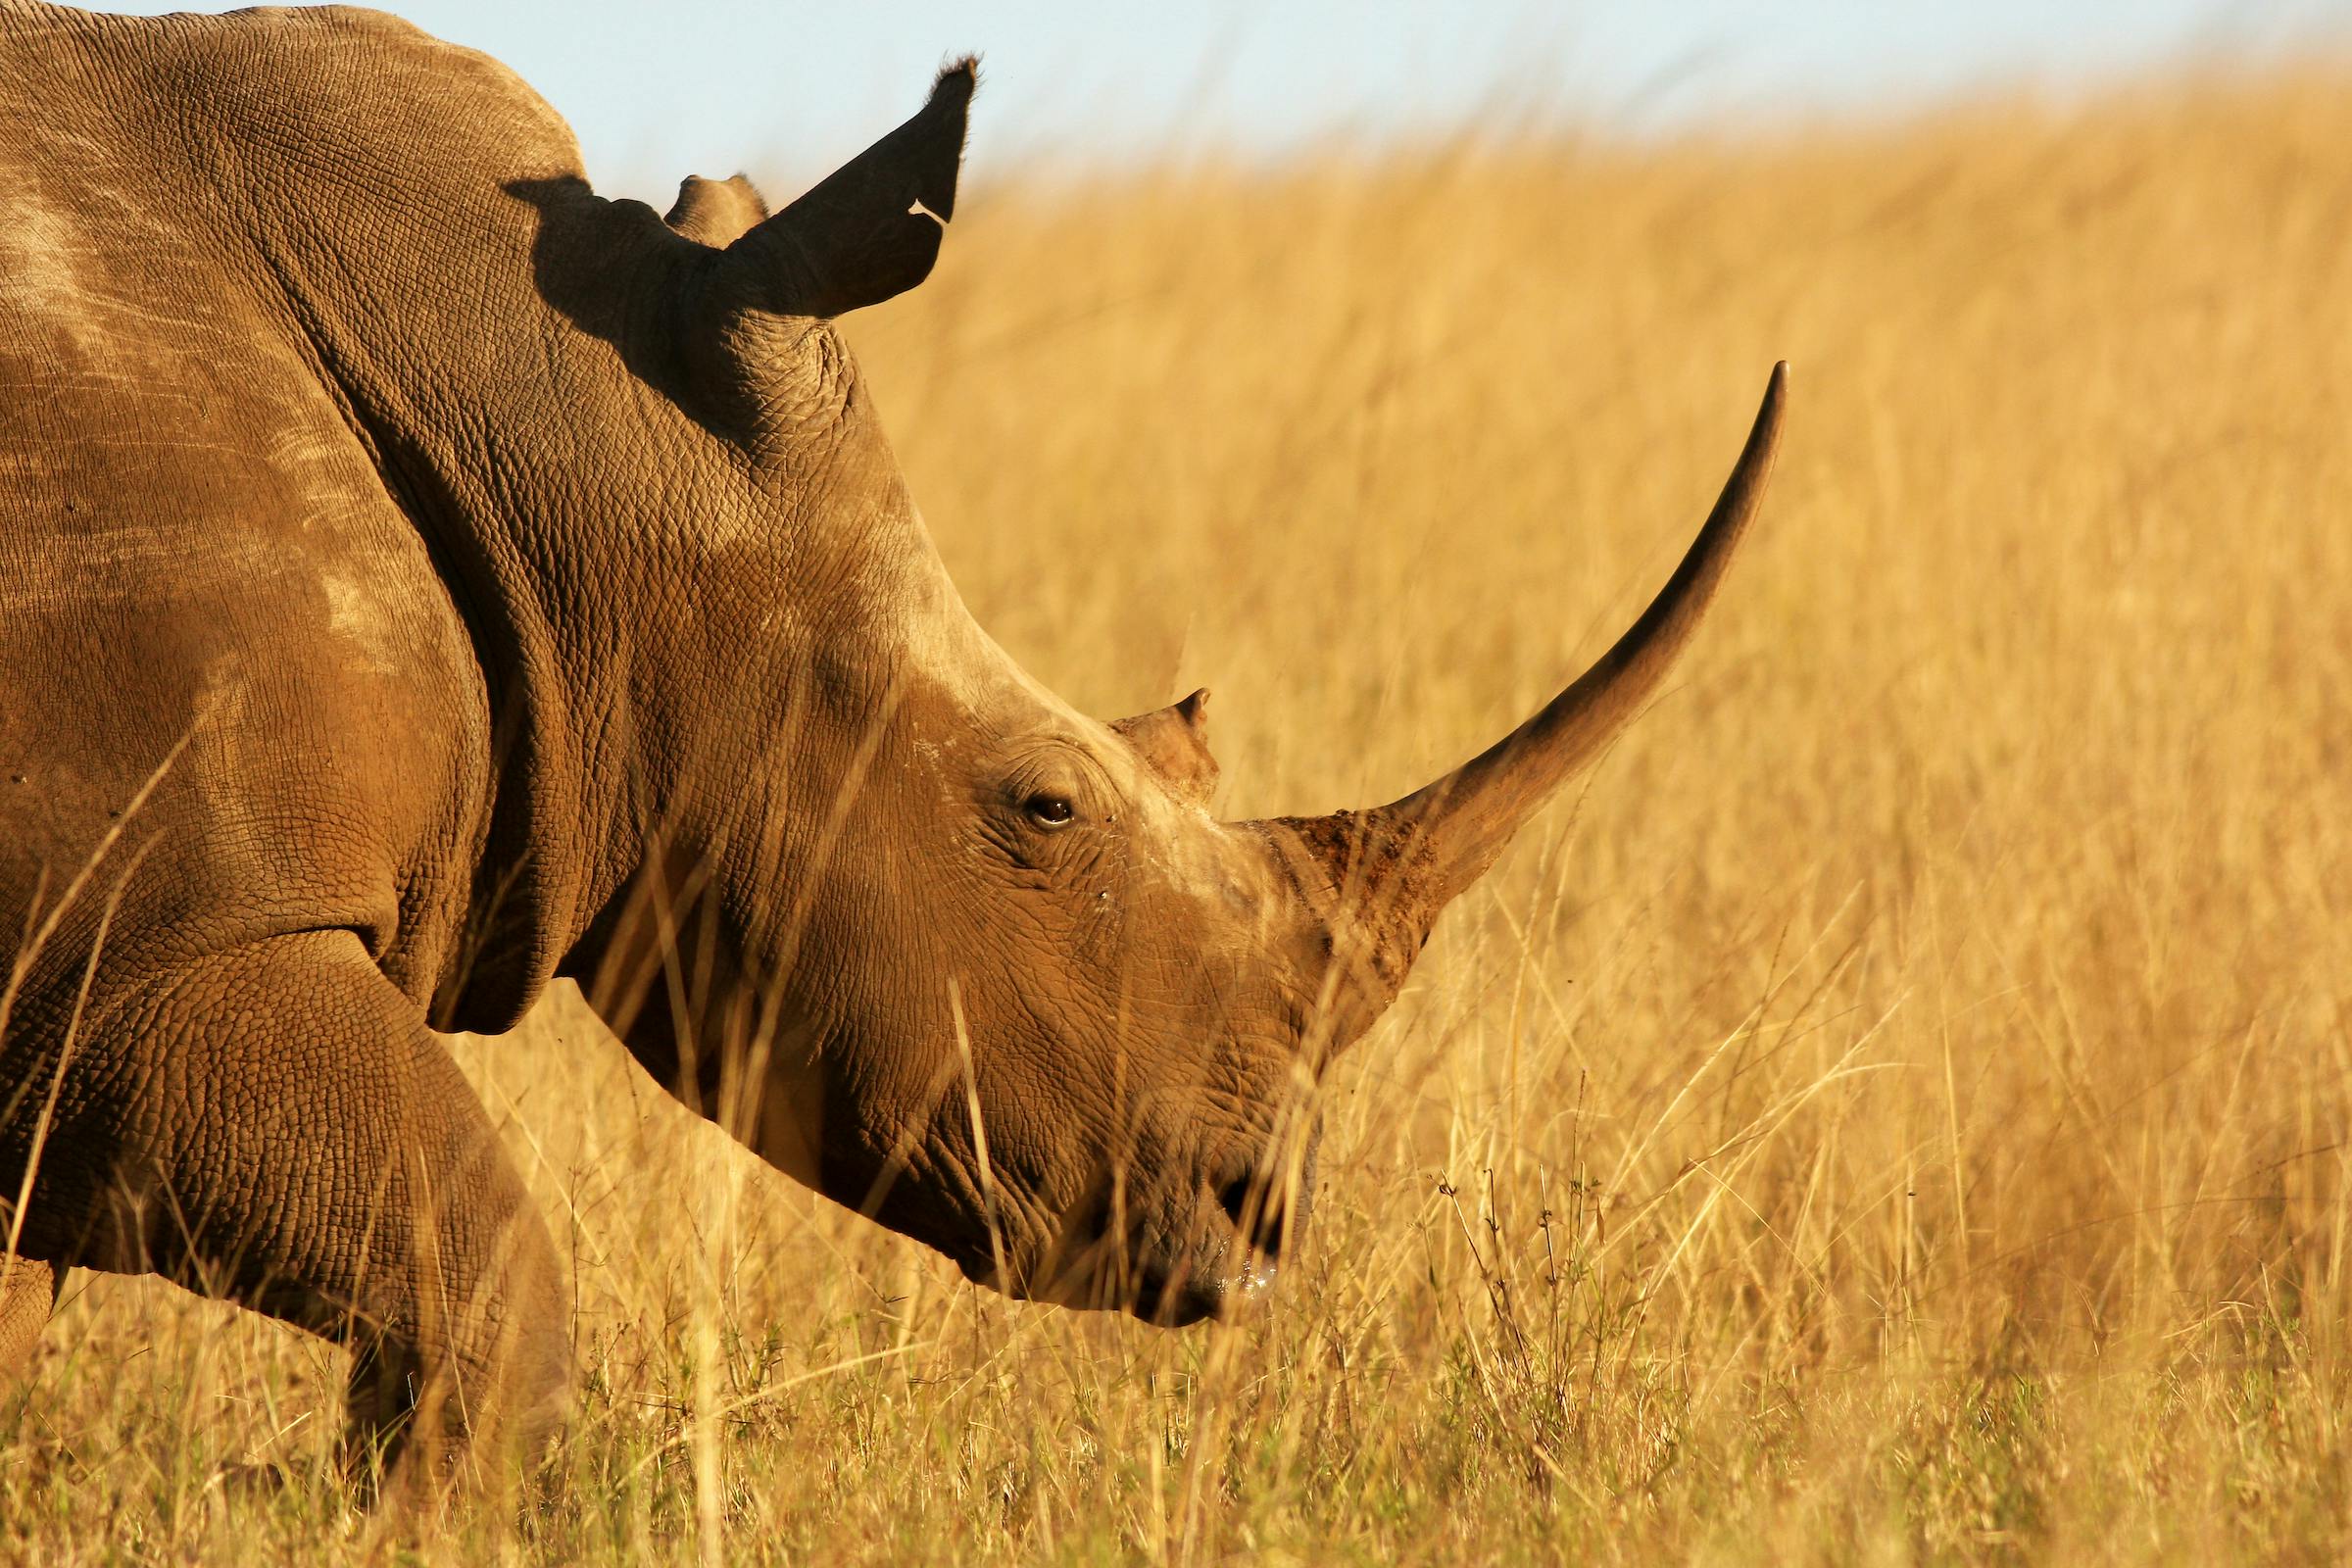 An Update on Rhino Poaching in South Africa